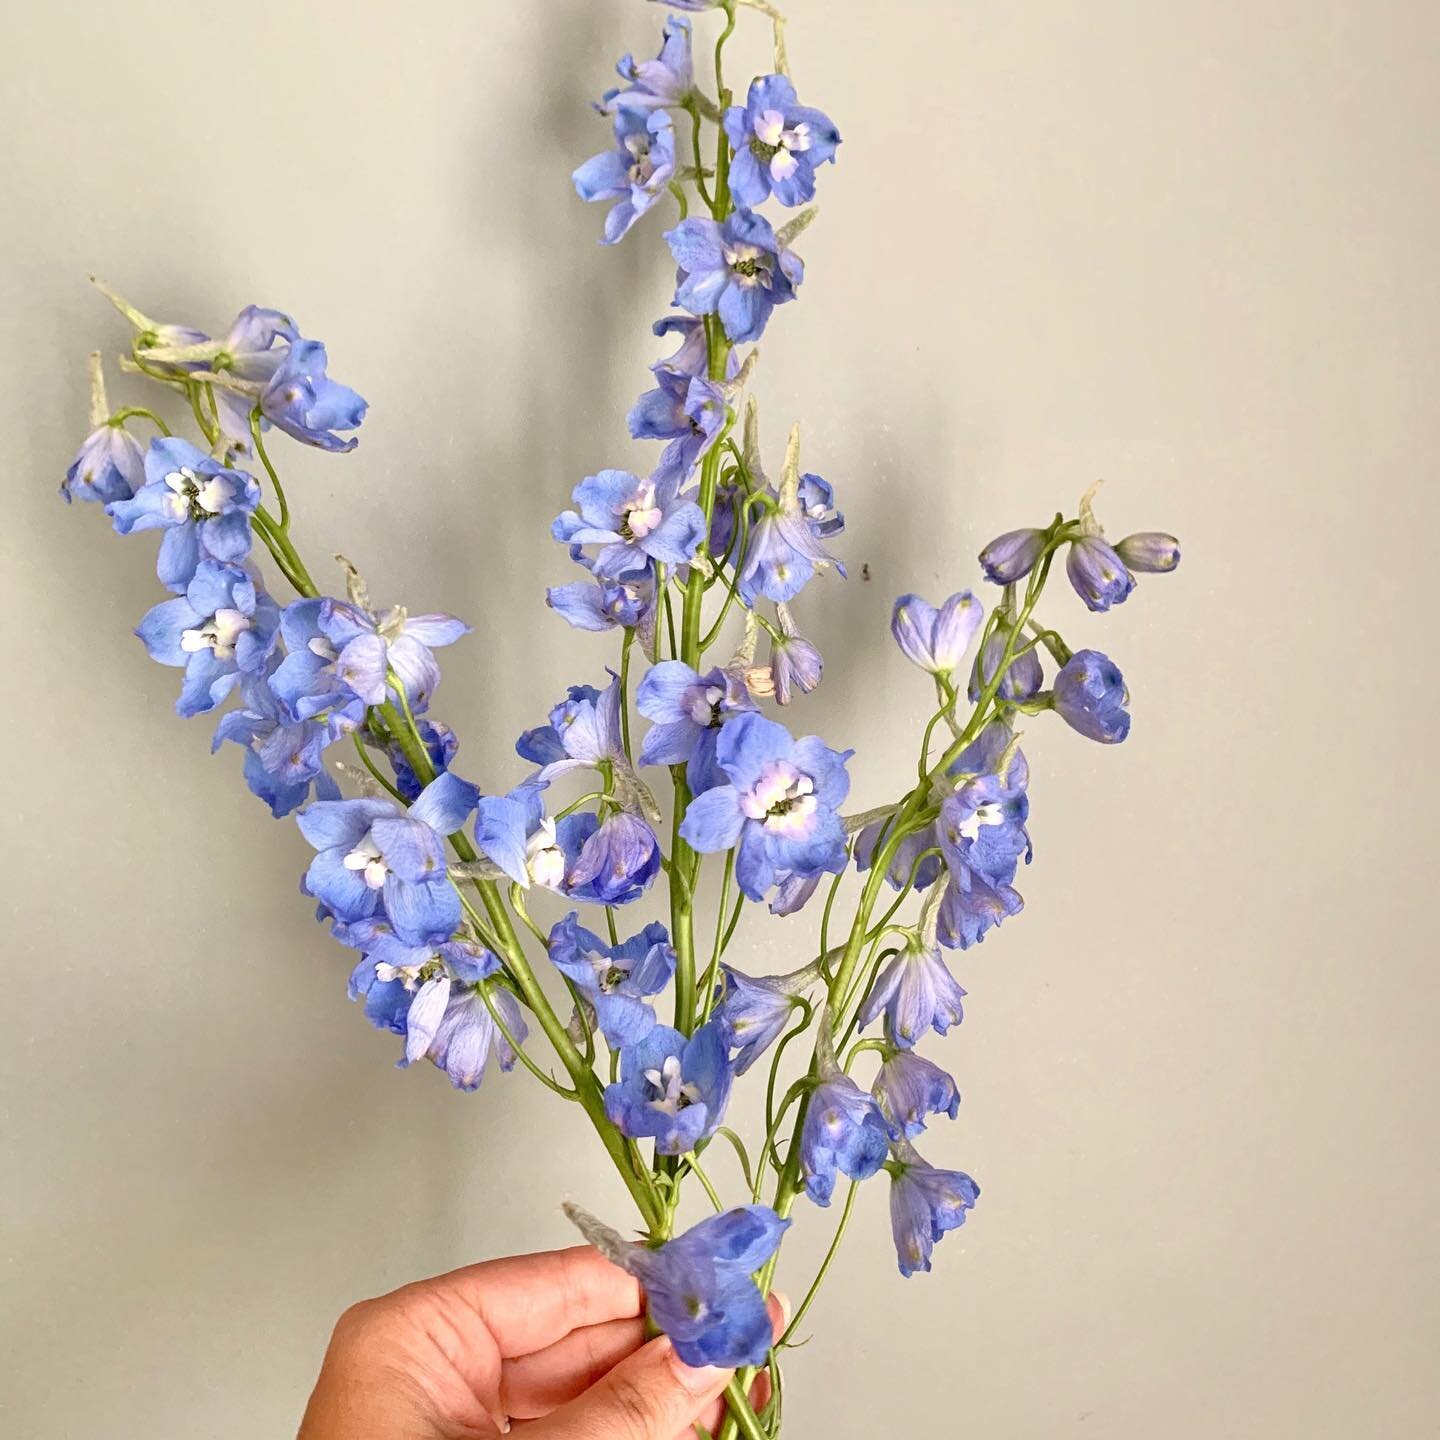 Blue delphinium comin&rsquo; at ya this #flowerfriday these delicate blooms are so versatile- they&rsquo;re great for bouquets, arrangements and installations! They can add height or snip them a tad and they can add fullness! These come in many color